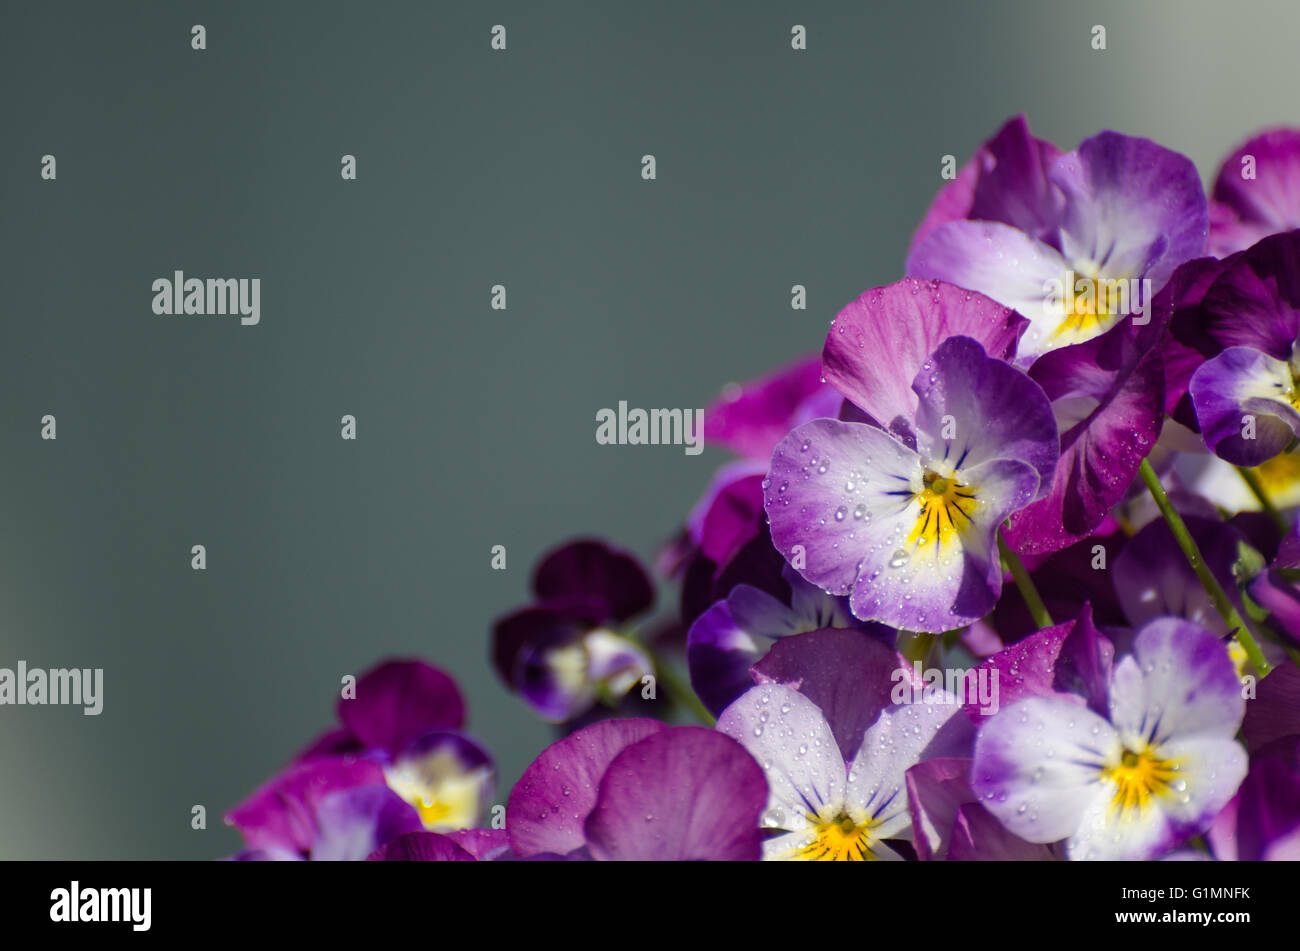 Detail of a flower pot with focus on one viol flower Stock Photo